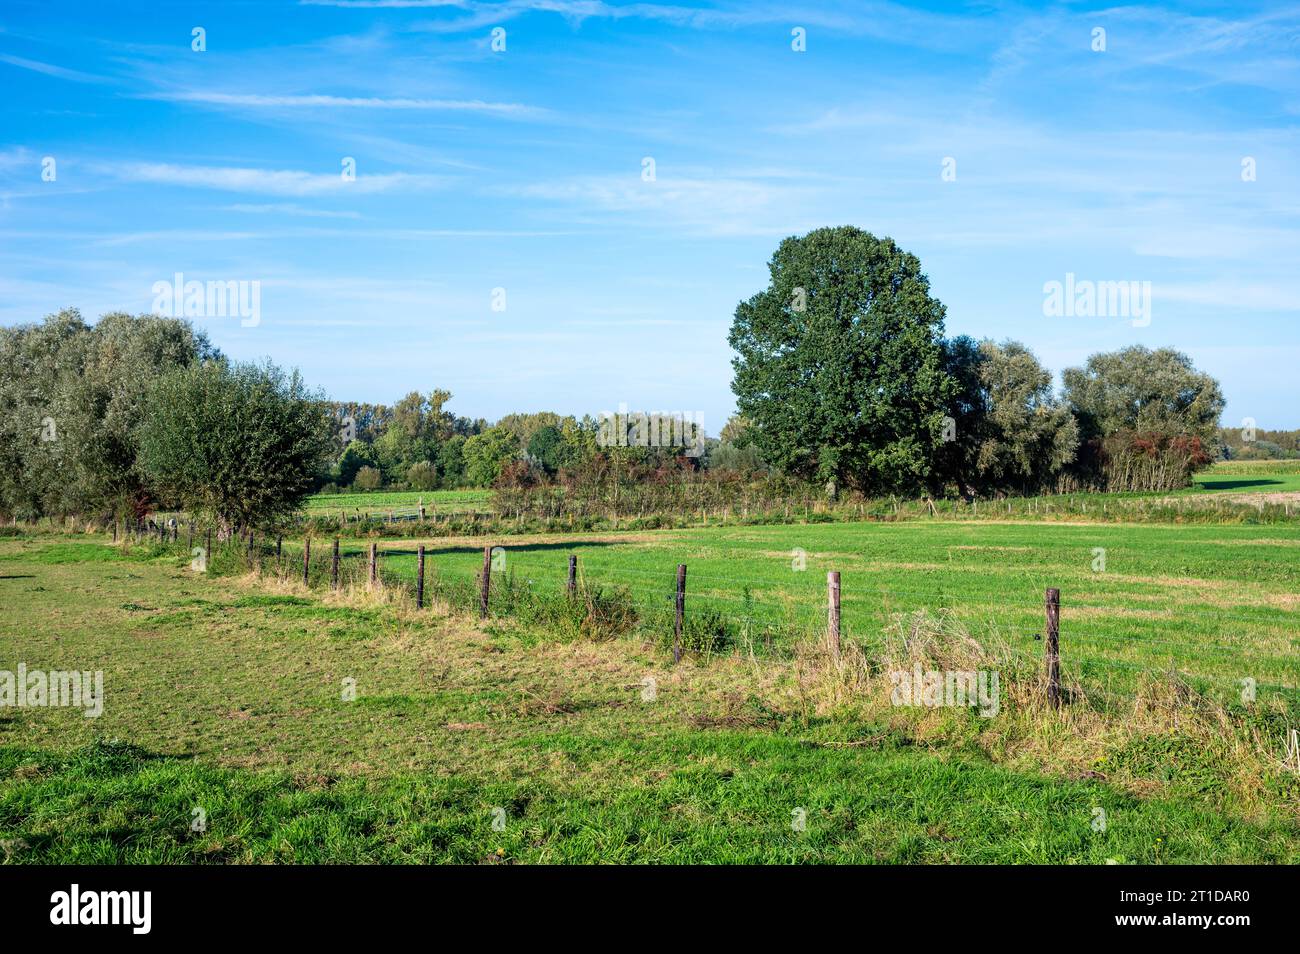 Diagonal fence in the green fields of the agriculture fields around Aspelare, East Flemish Region, Belgium Credit: Imago/Alamy Live News Stock Photo